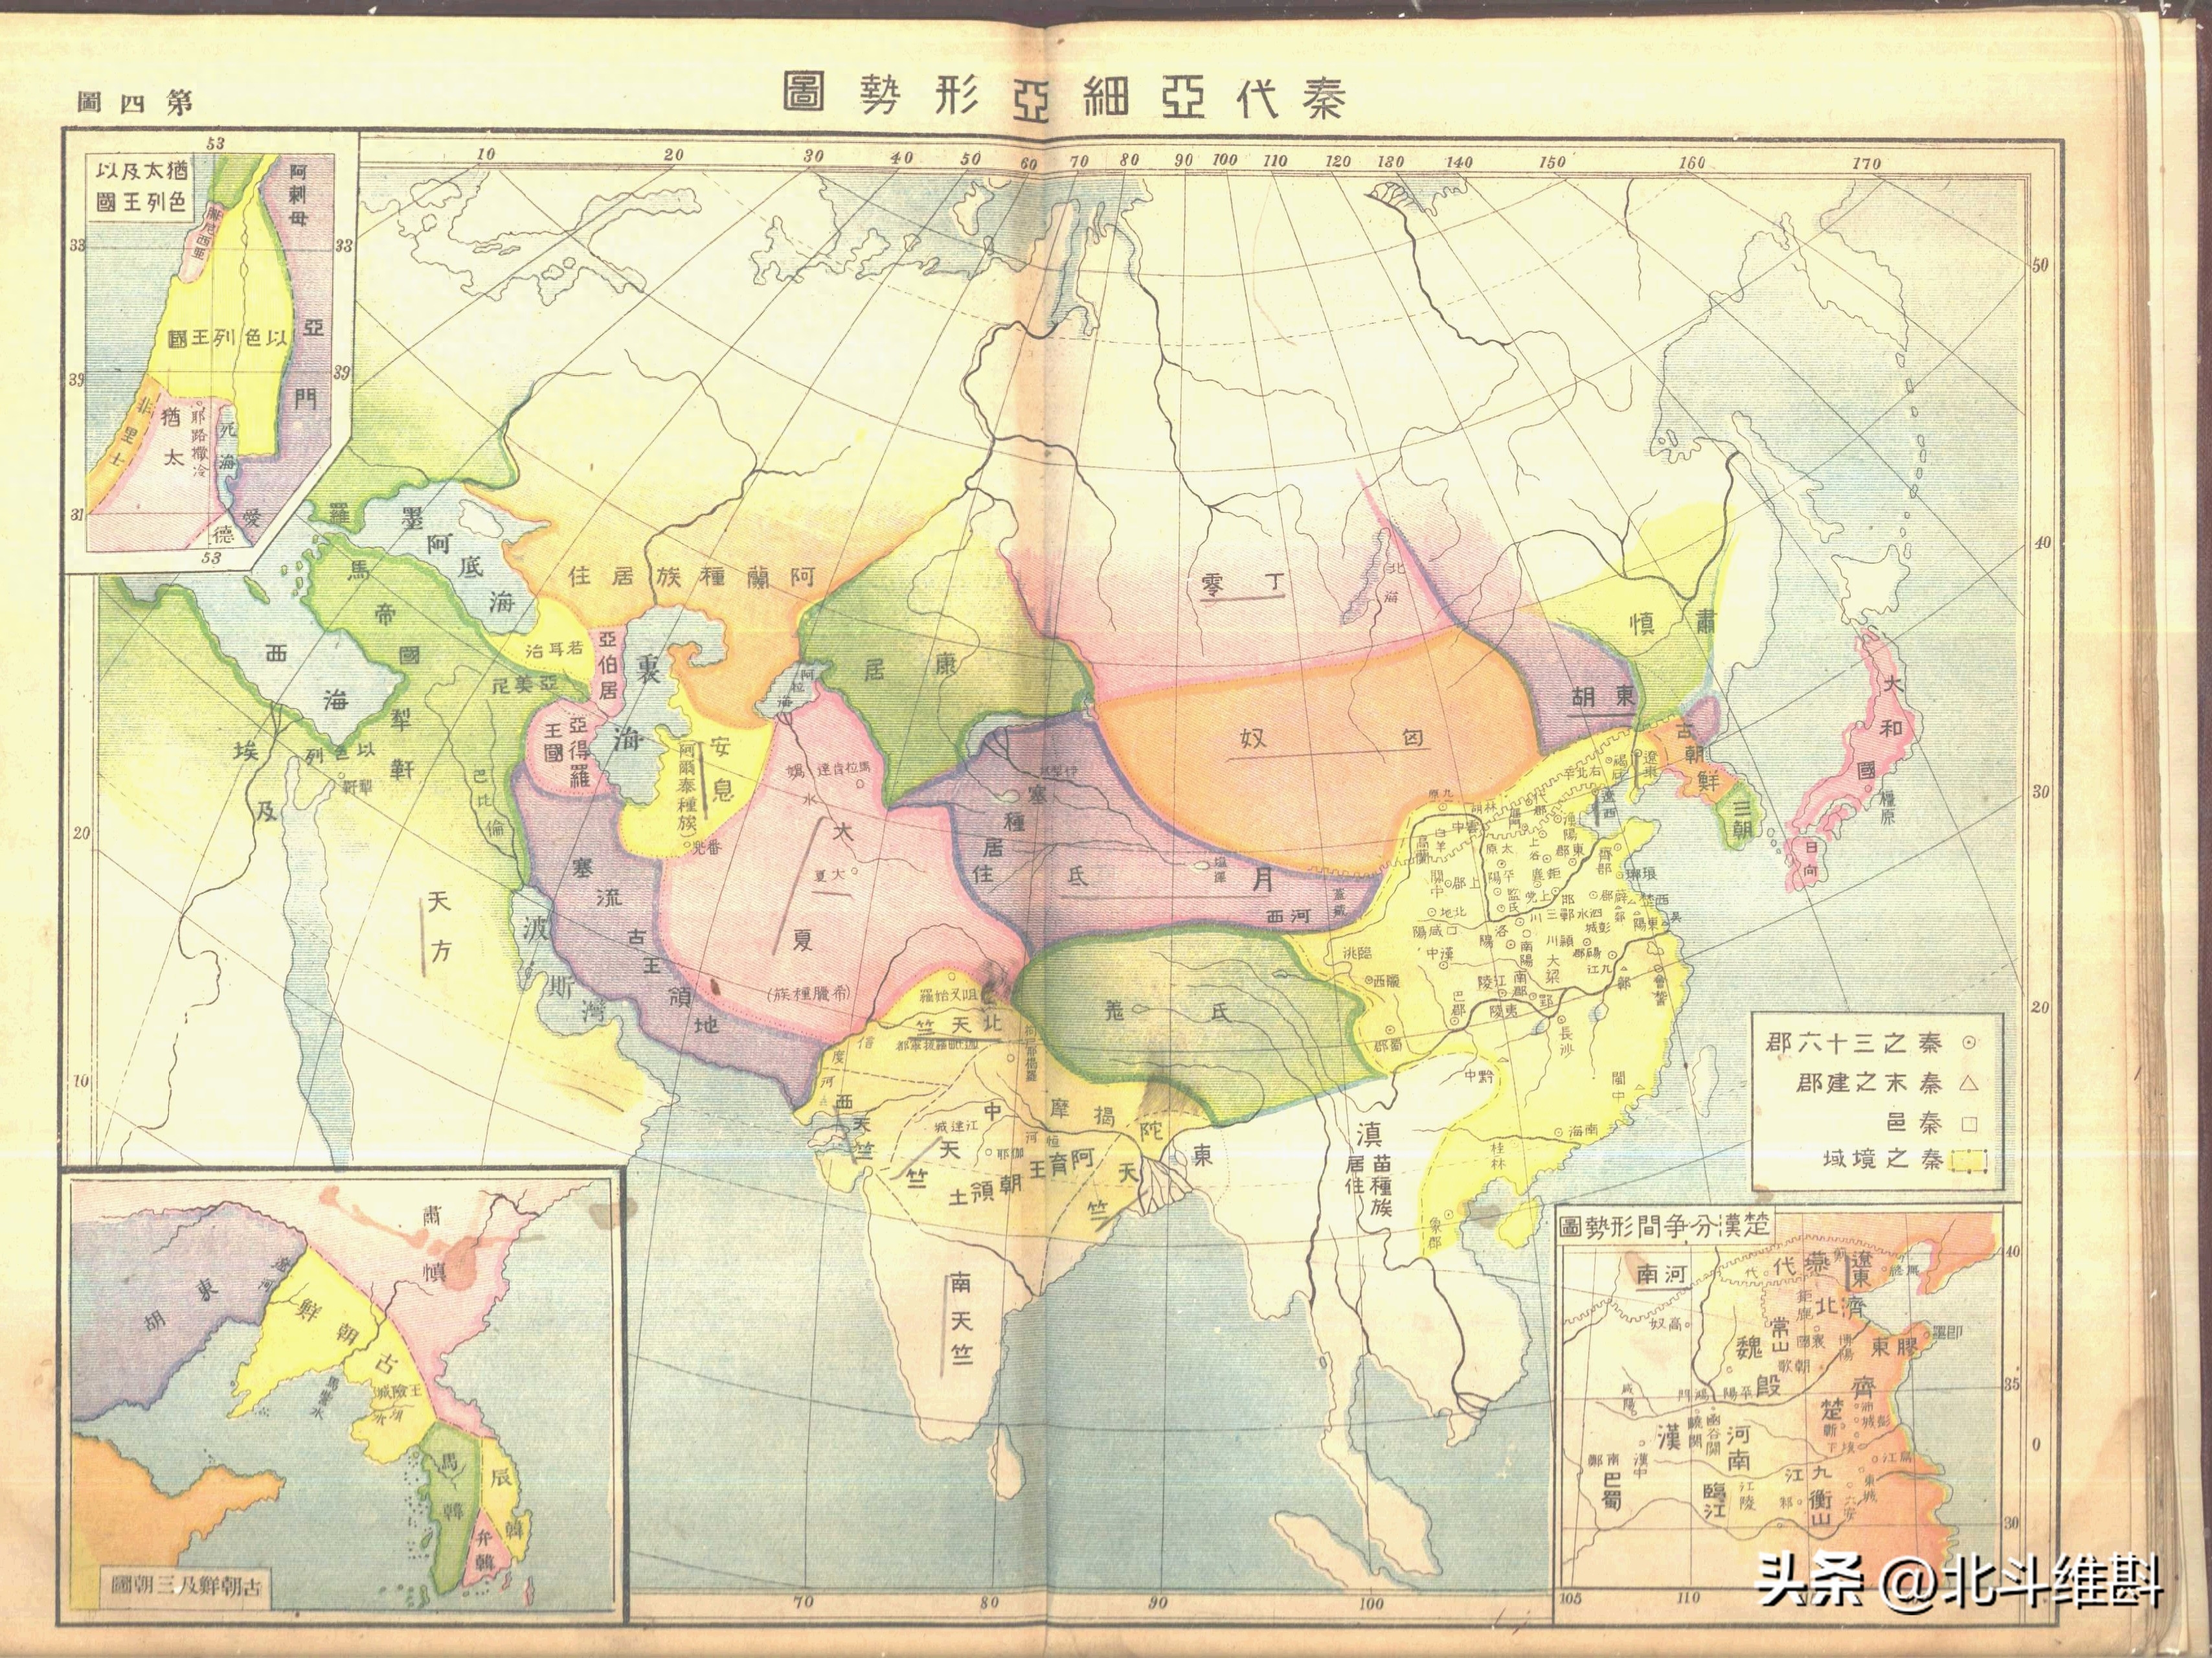 The historical map of Asia during the Republic of China: full of errors, the Qin Dynasty was actually juxtaposed with the Roman Empire